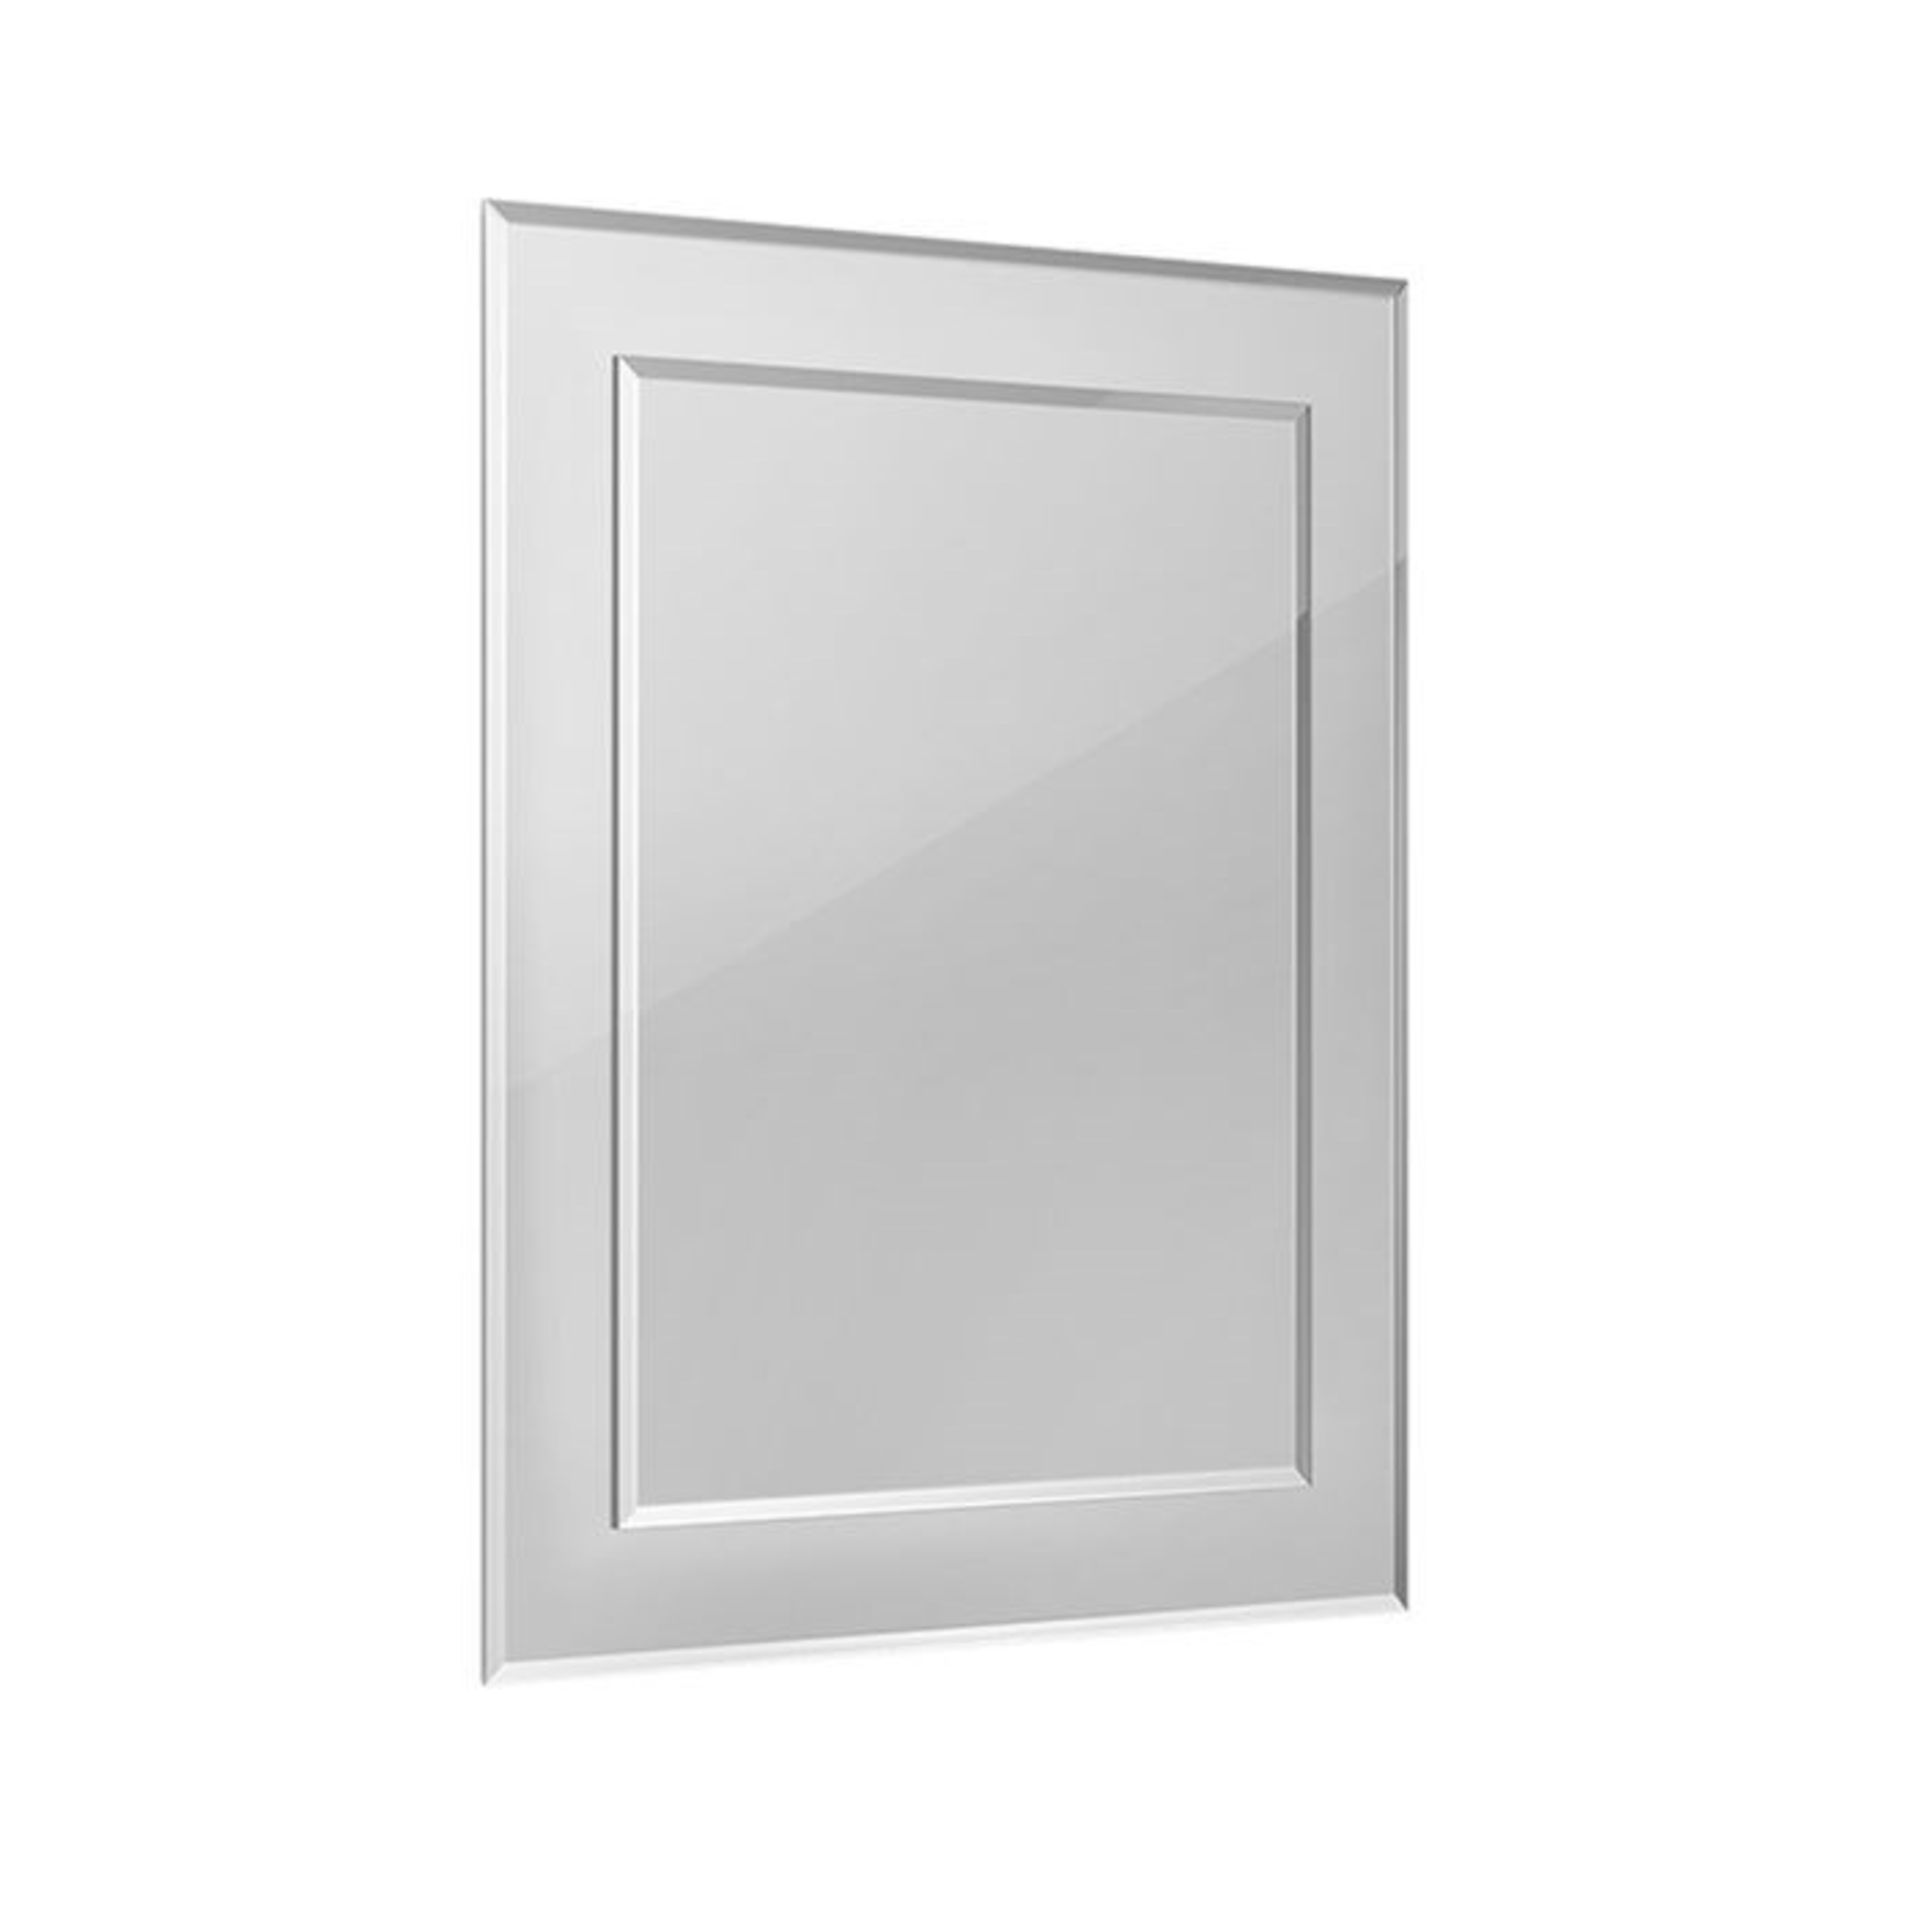 400x500mm Bevel Mirror. Smooth beveled edge for additional safety Supplied fully assembled